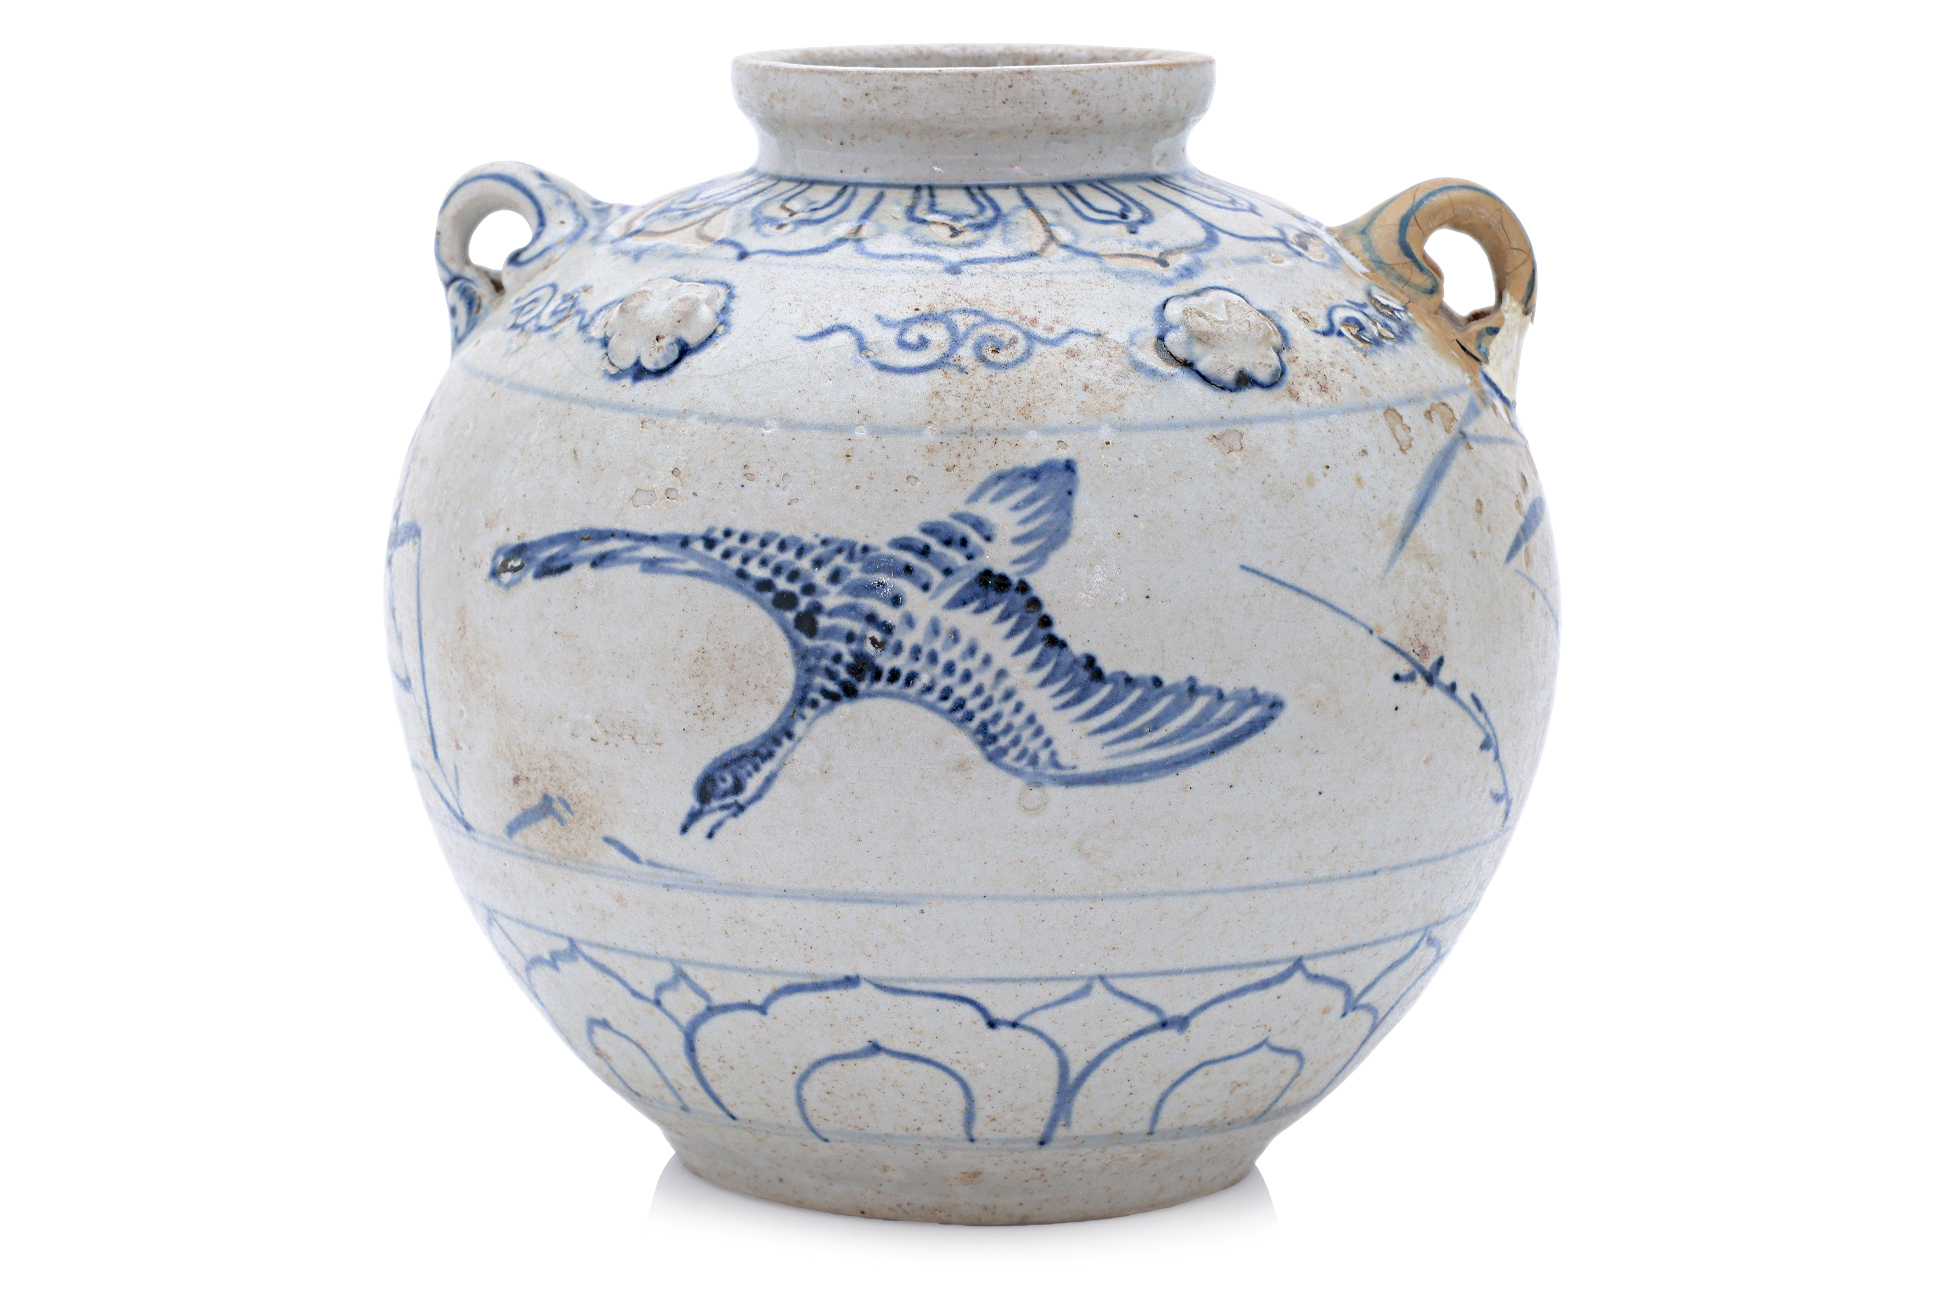 A VIETNAMESE BLUE AND WHITE JAR DECORATED WITH FLYING GEESE - Image 2 of 4